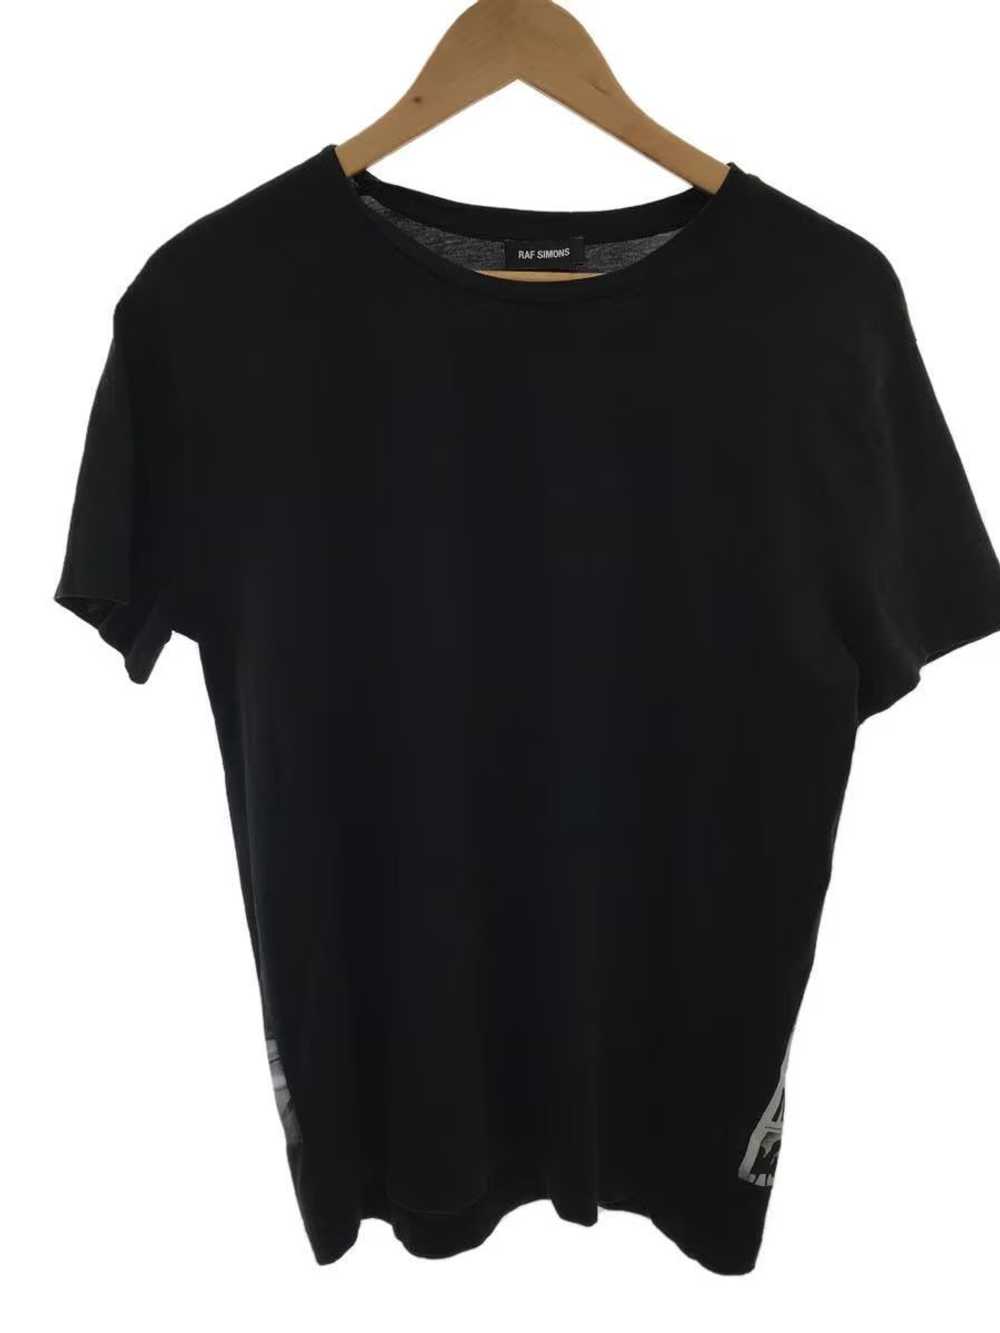 Raf Simons "TO THE ARCHIVES" Tee - image 2